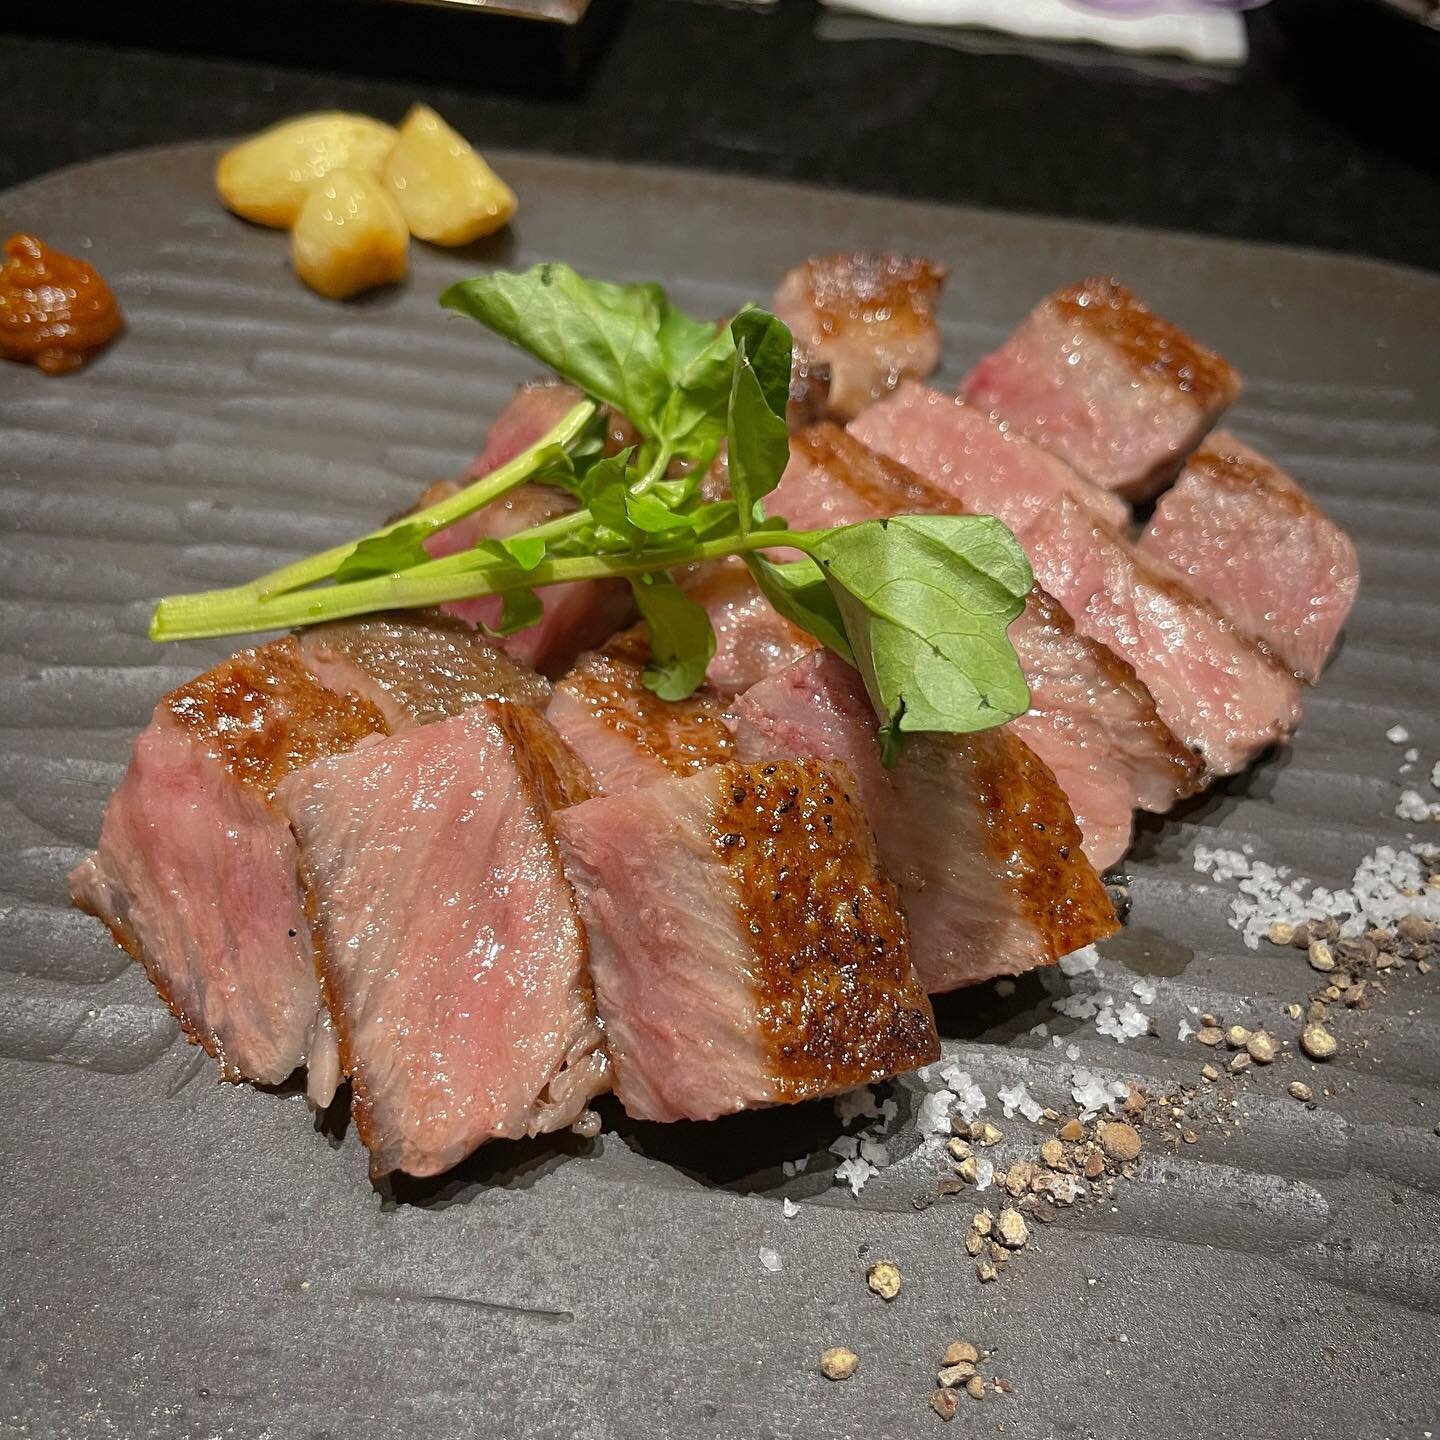 Chateaubriand Steak that melts instantly in your mouth.